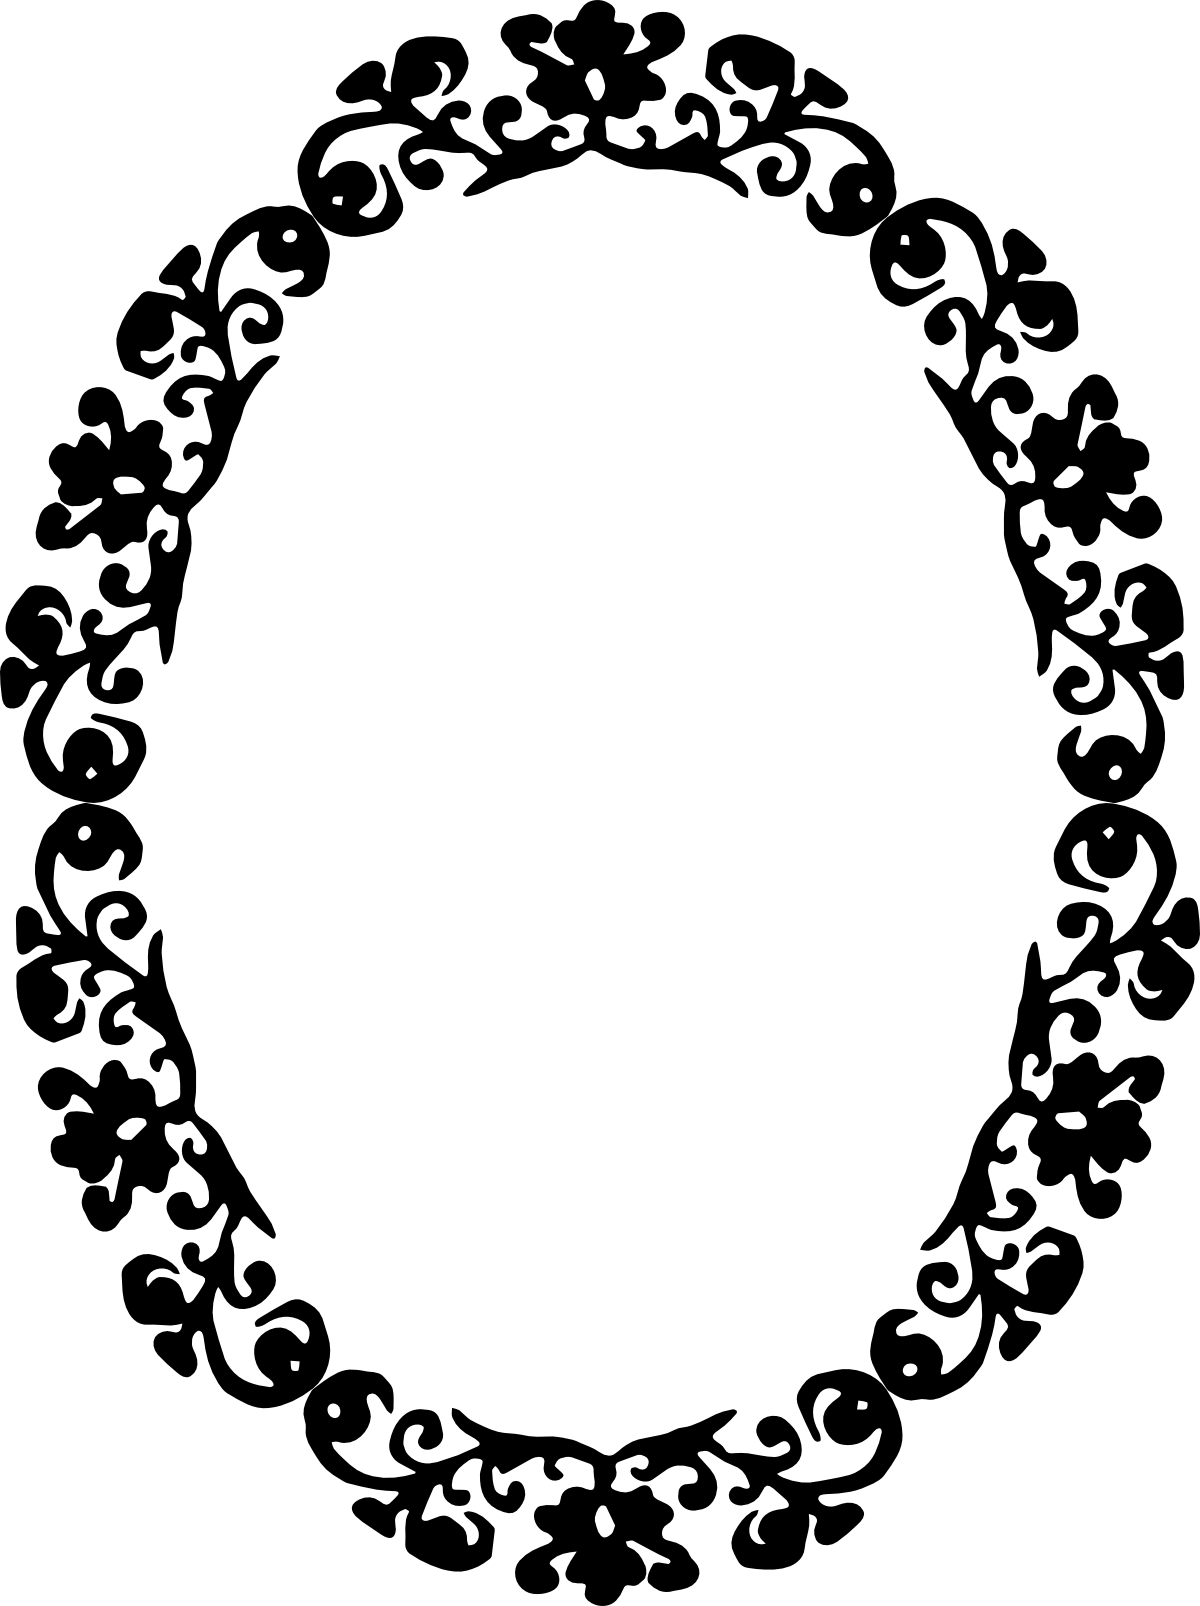 Oval frame clipart black and white